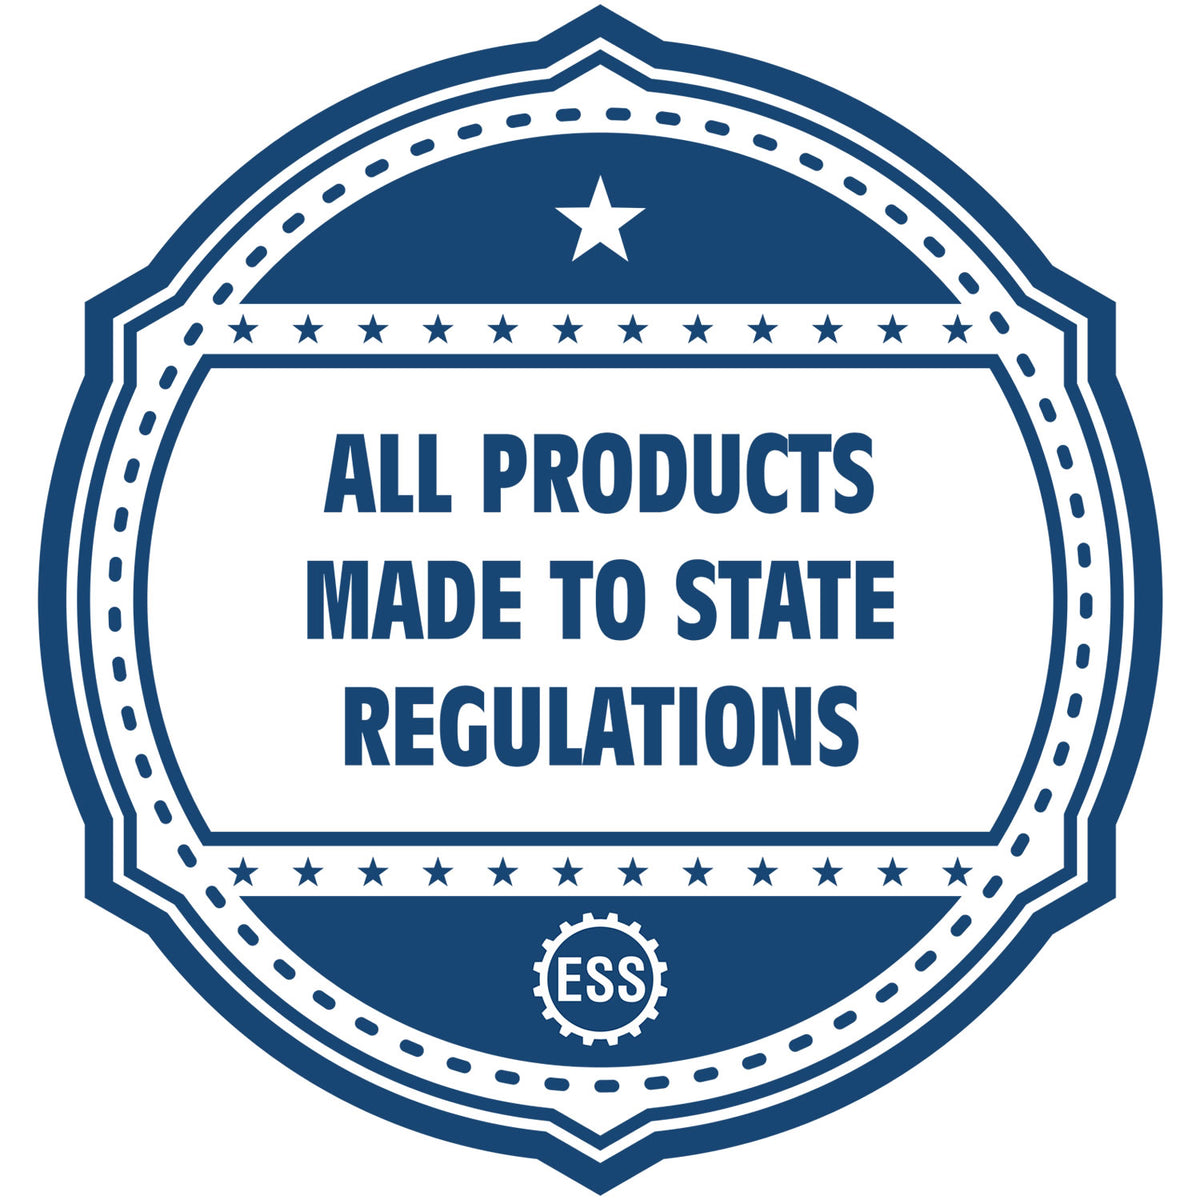 An icon or badge element for the Soft Pocket Tennessee Landscape Architect Embosser showing that this product is made in compliance with state regulations.